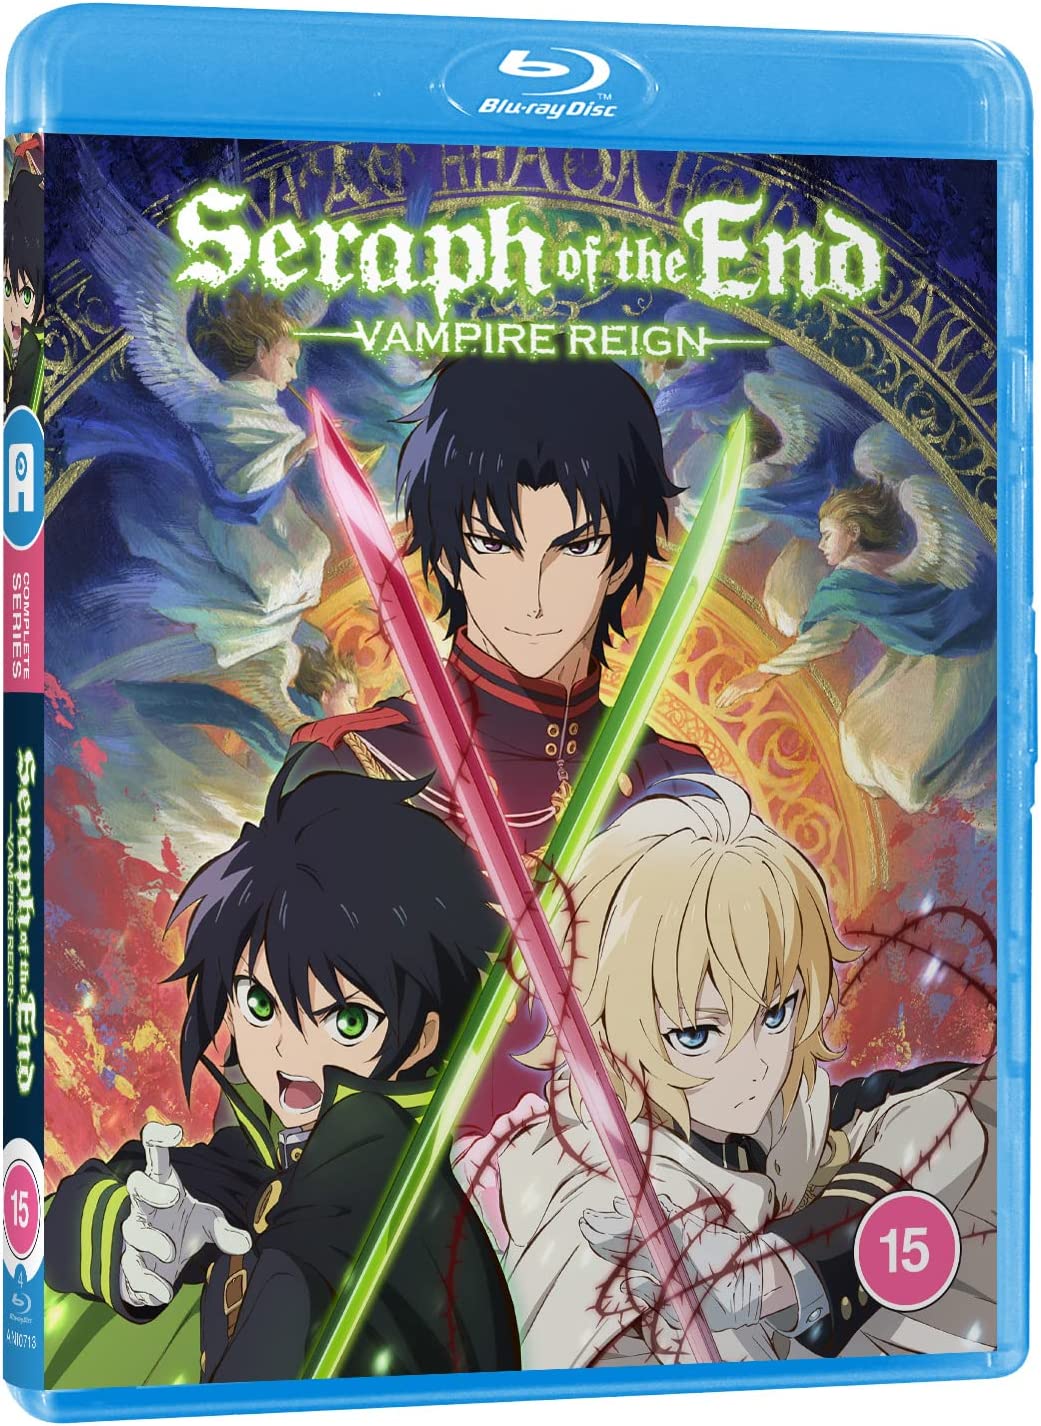 Seraph of the End - Complete Season 1 [Blu-ray]